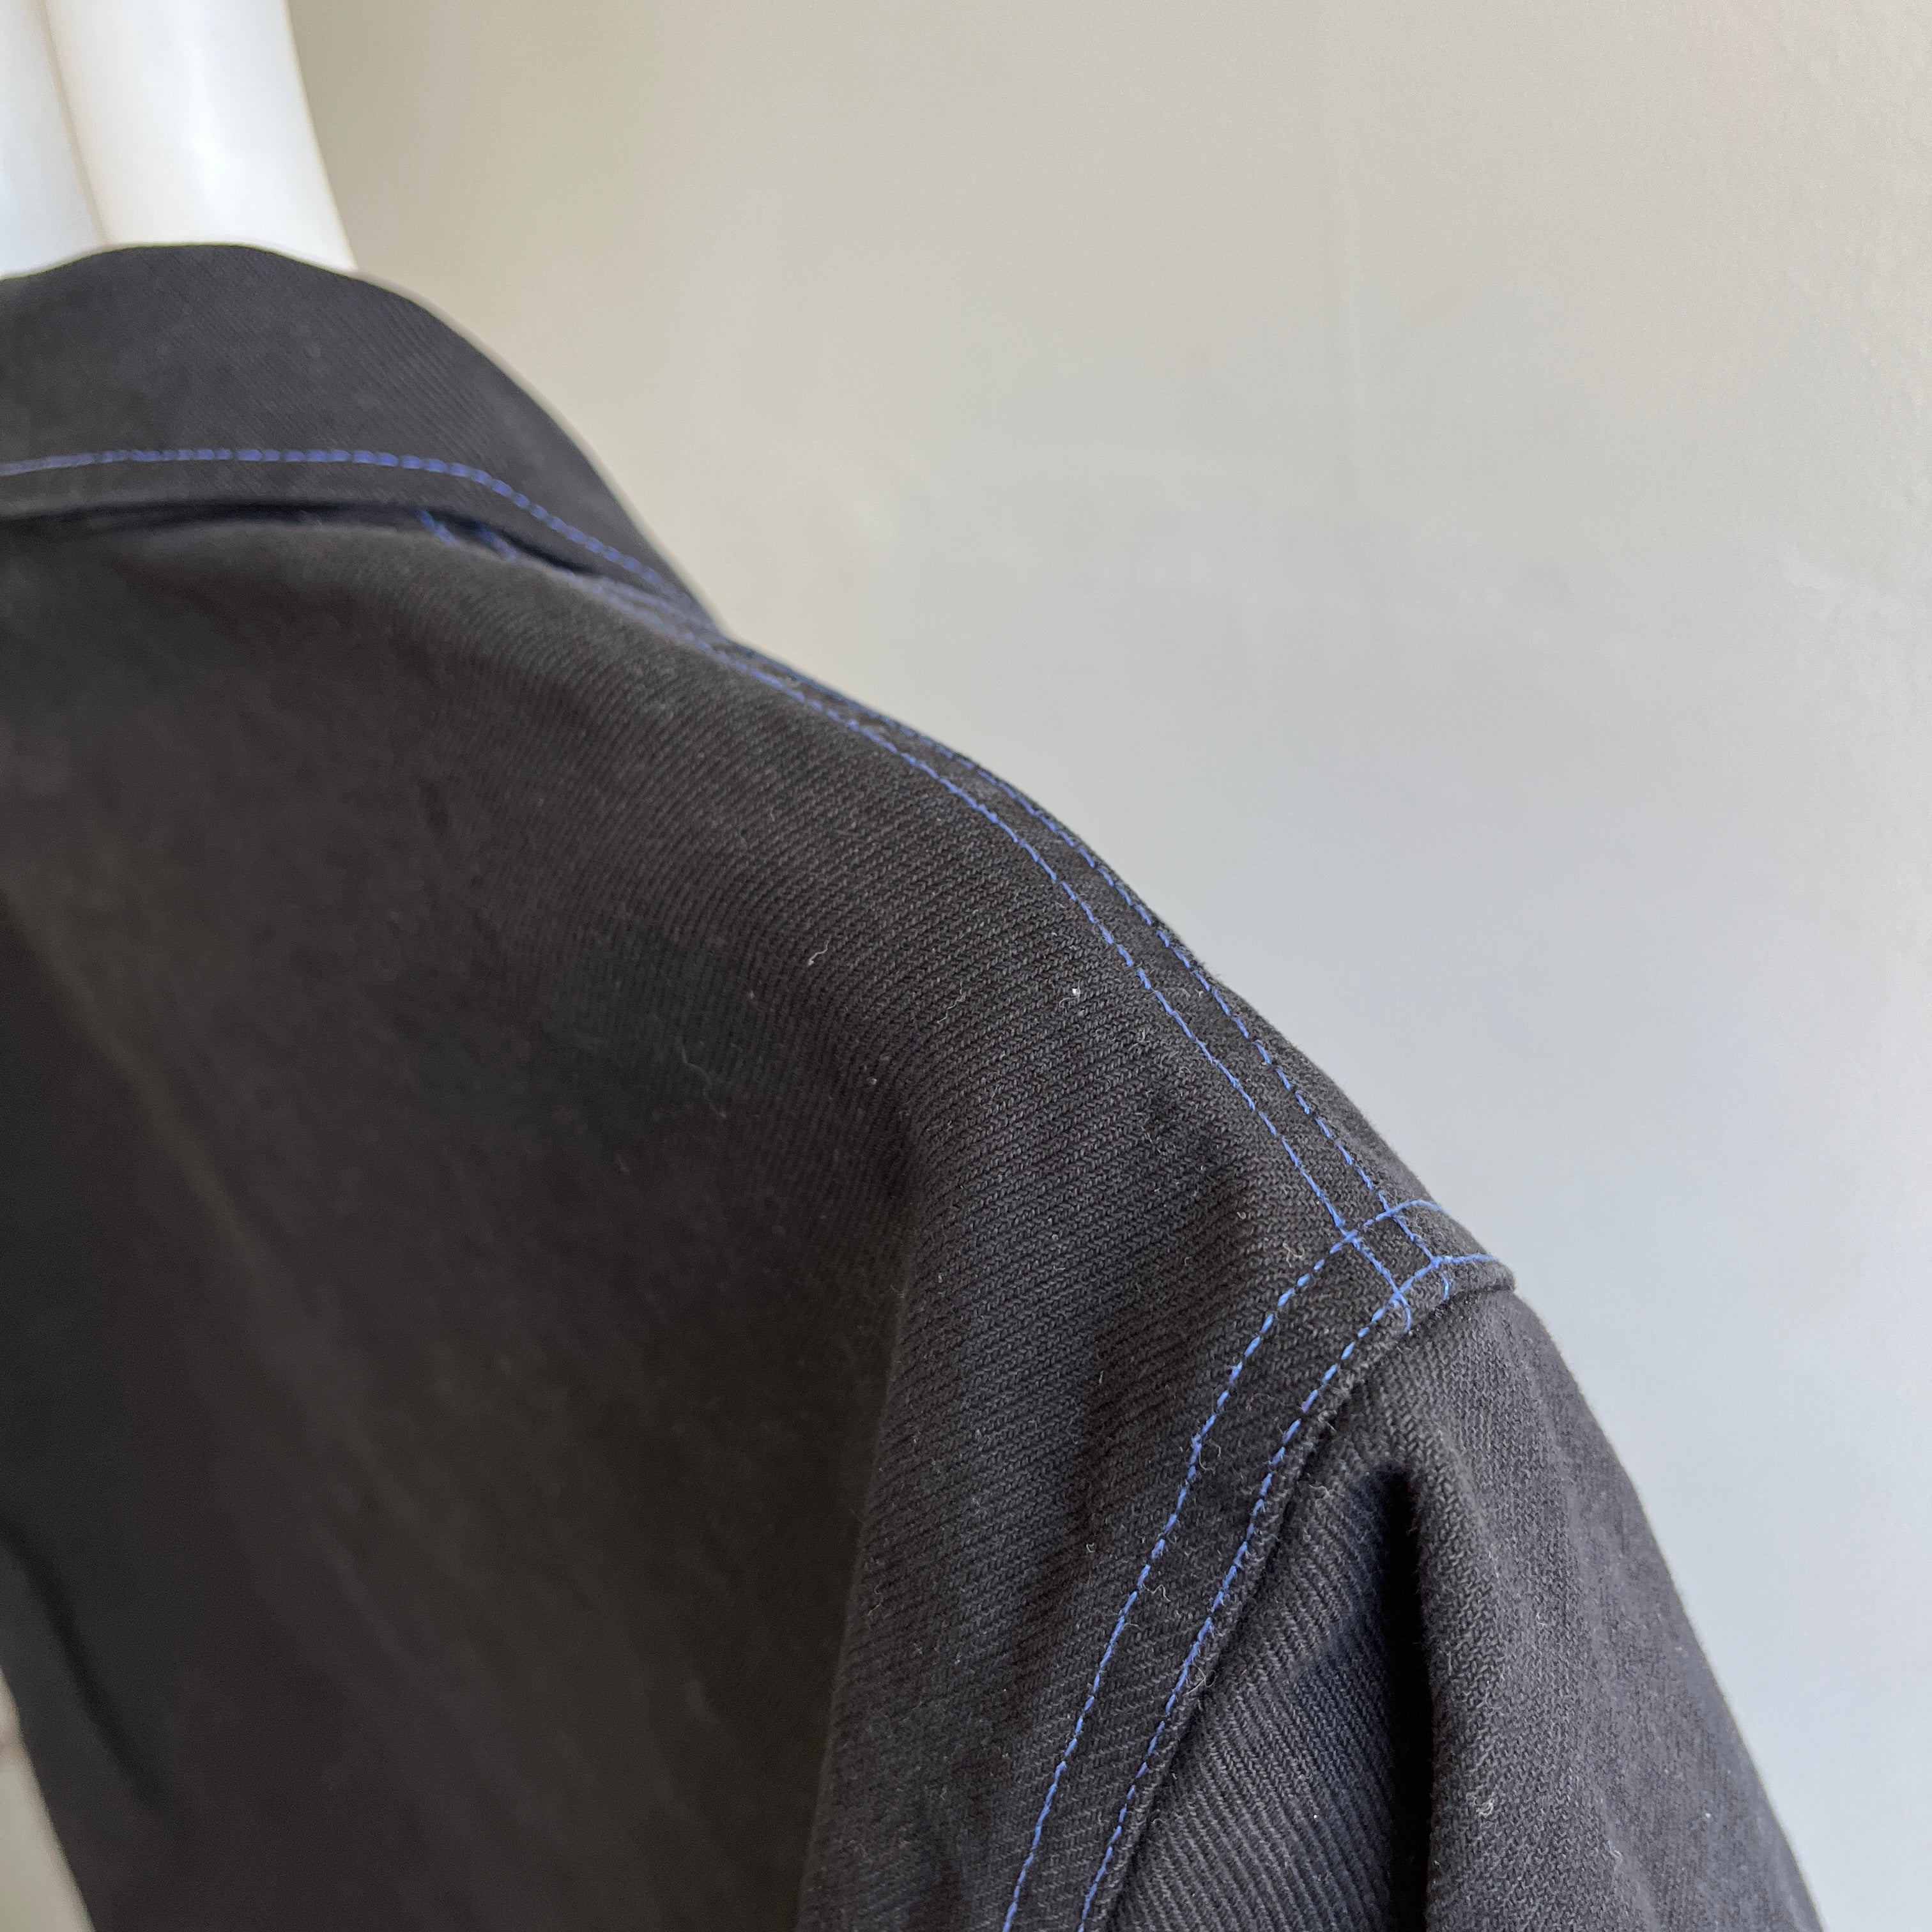 1990s Overdyed Black Chore Coat with Blue Stitching and Buttons